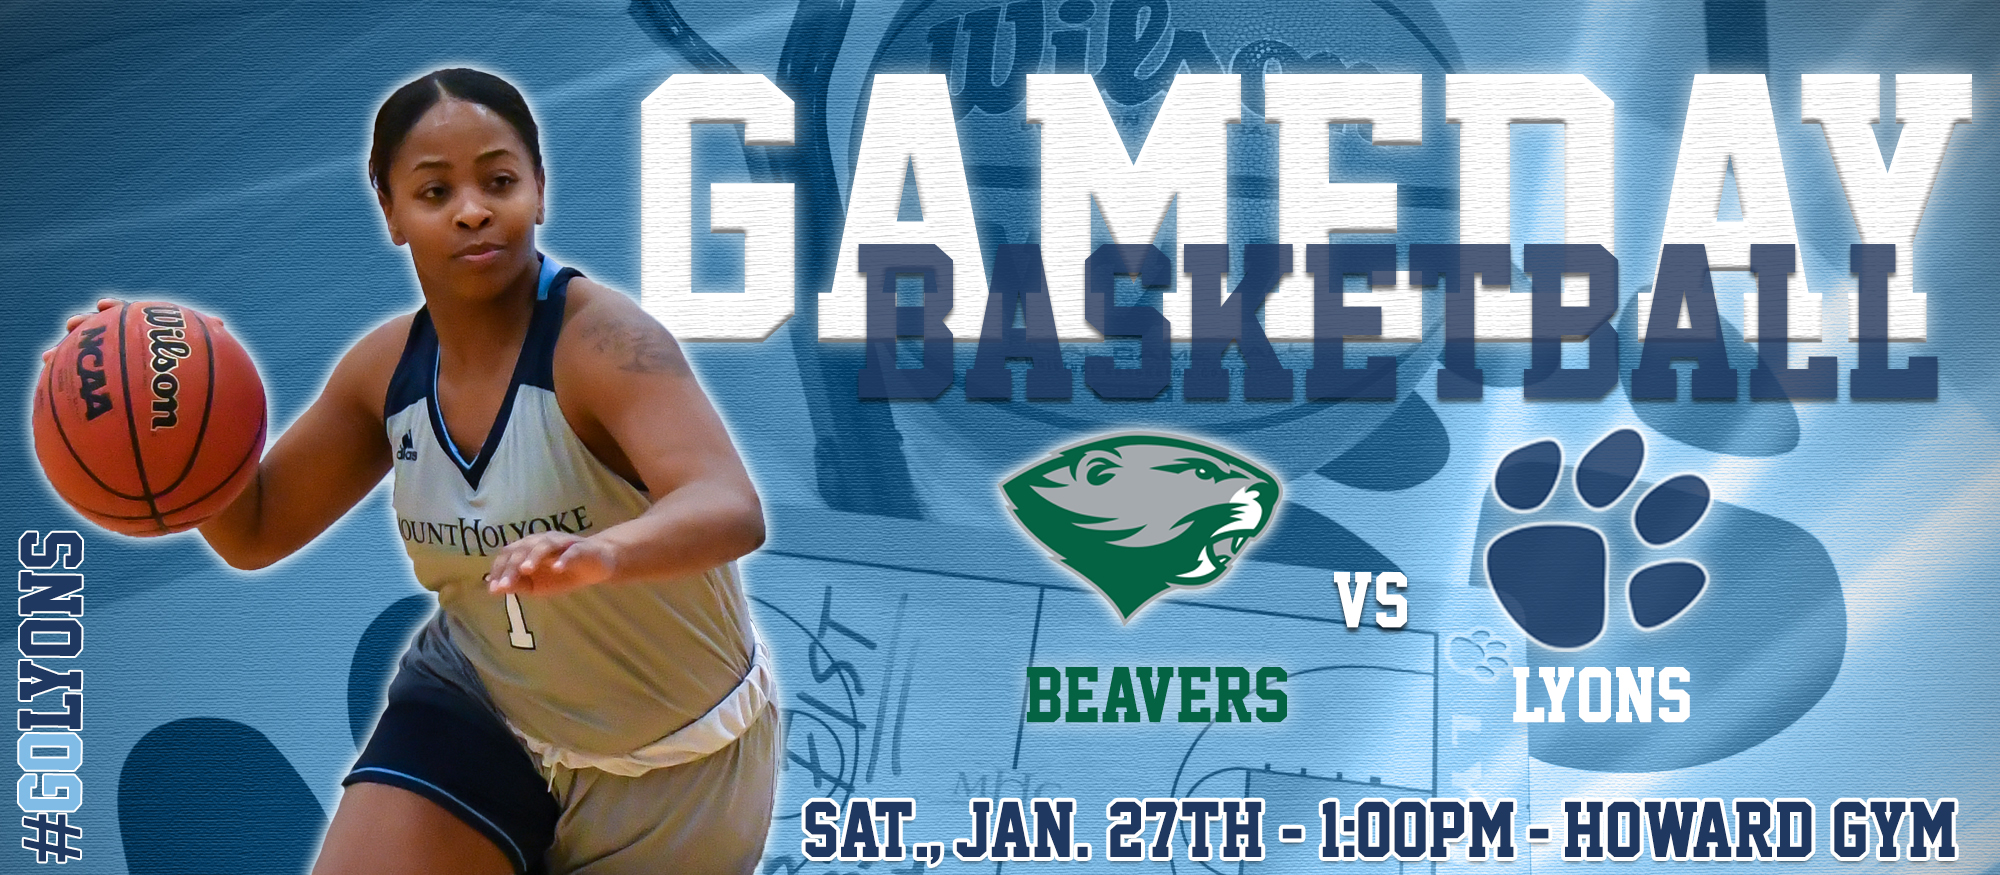 Gameday Central graphic for Mount Holyoke vs. Babson on 1/27/2018.